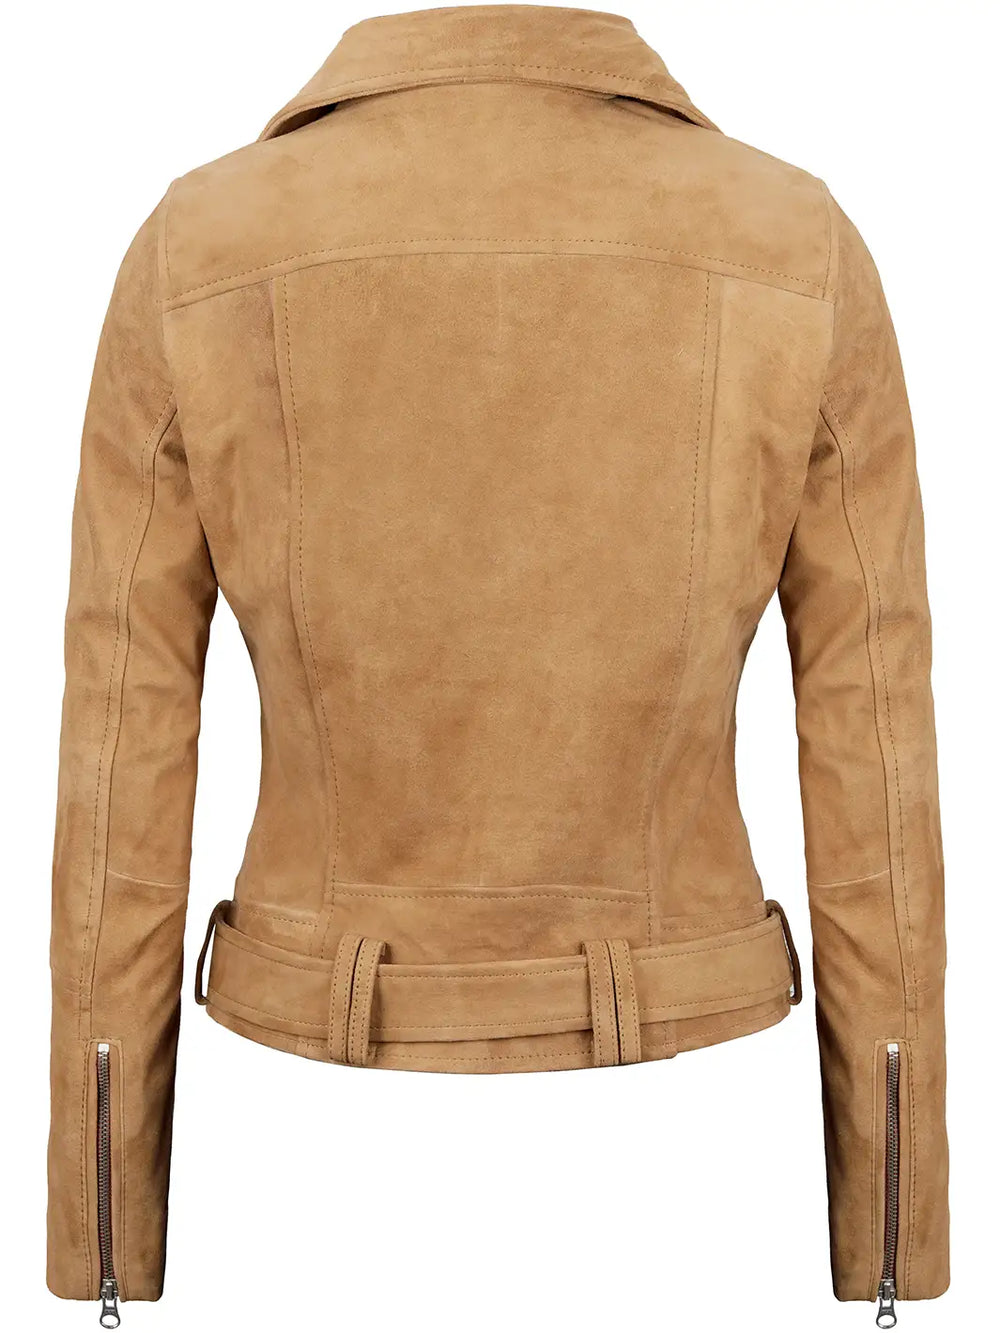 Light brown suede leather jacket